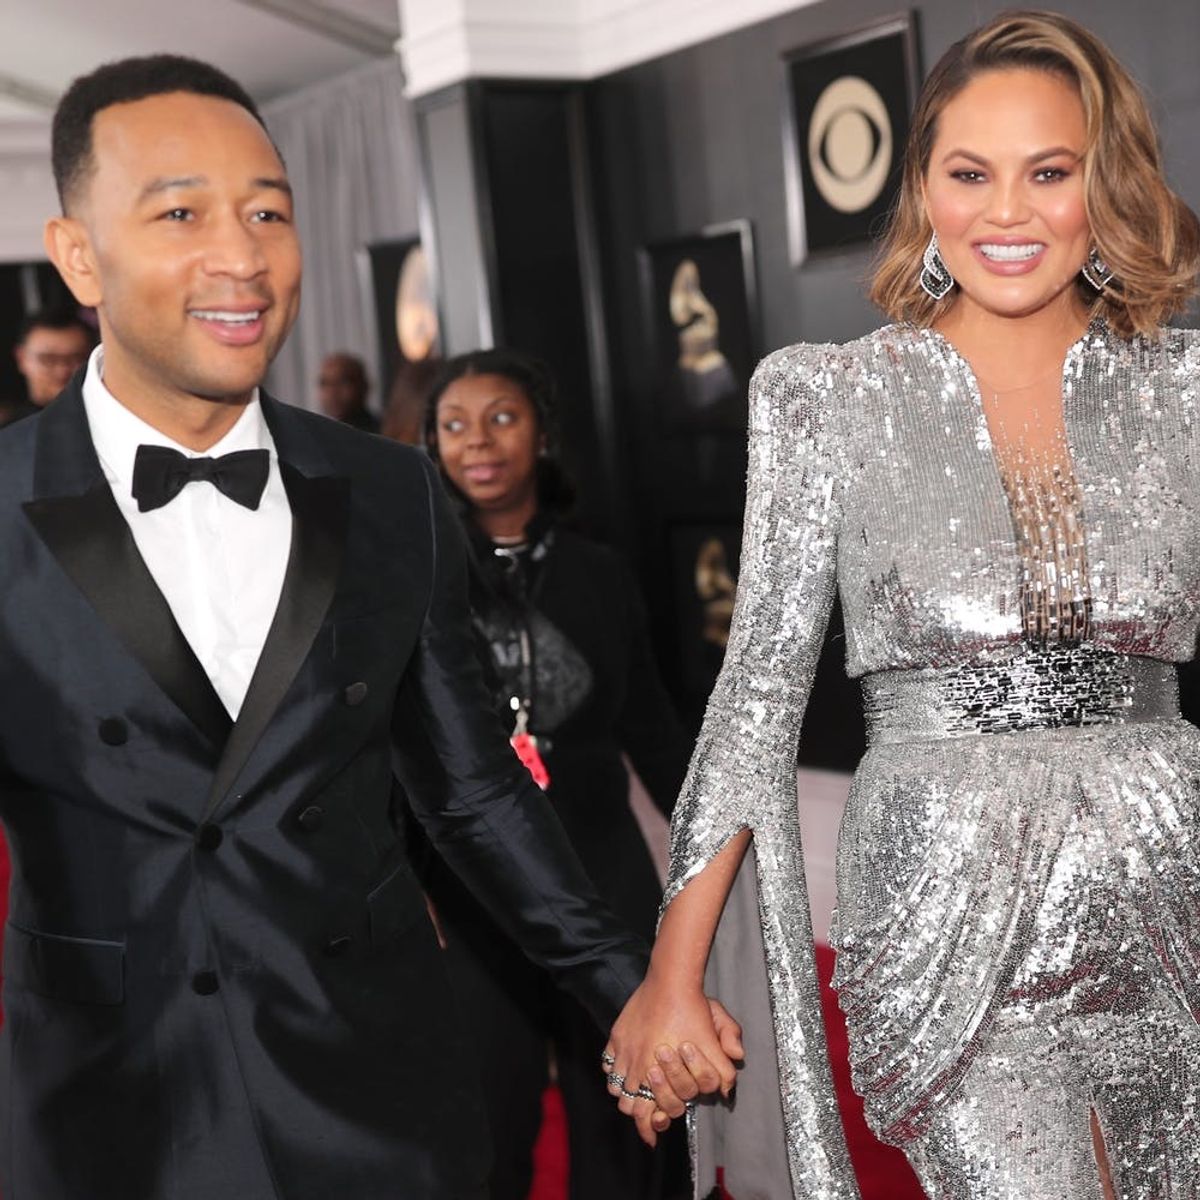 Chrissy Teigen Ends Her 2018 Grammys Night by Revealing That She’s Expecting a Baby Boy!